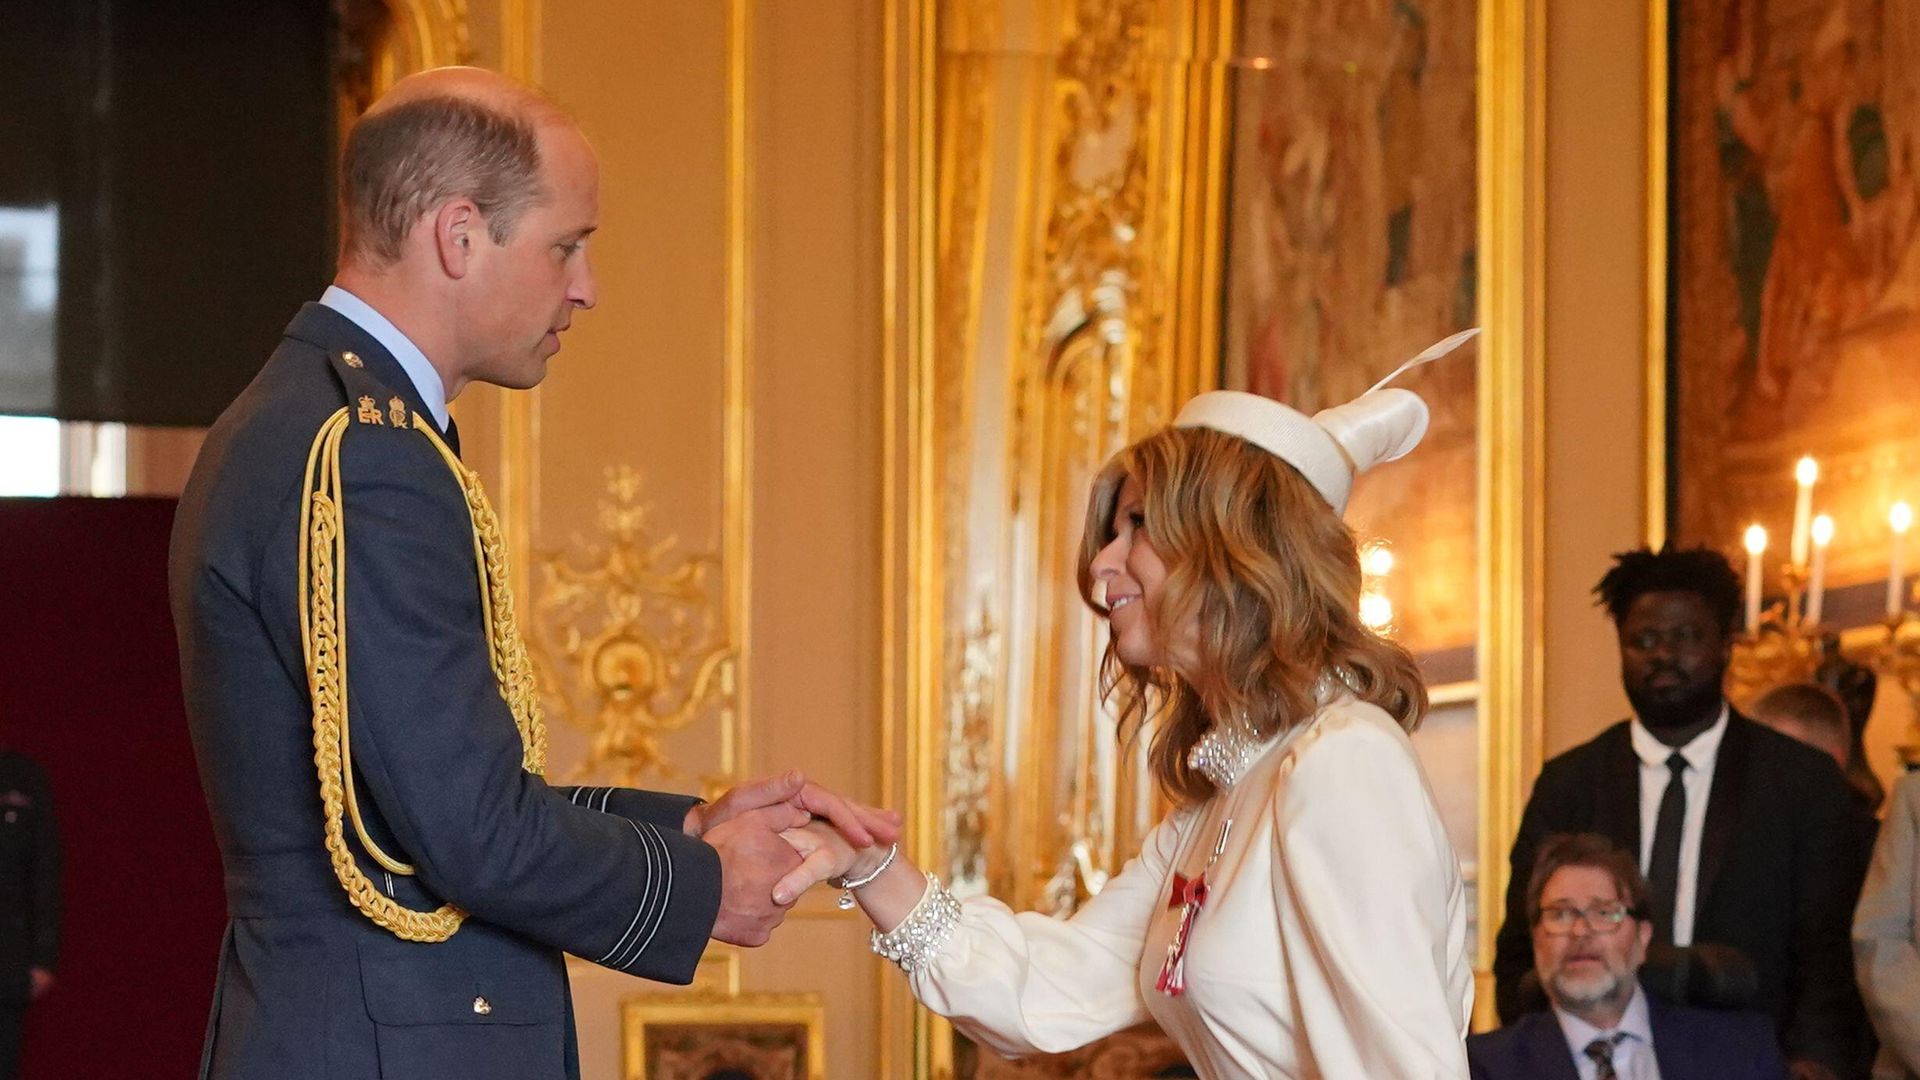 Kate shaking hands with Prince William